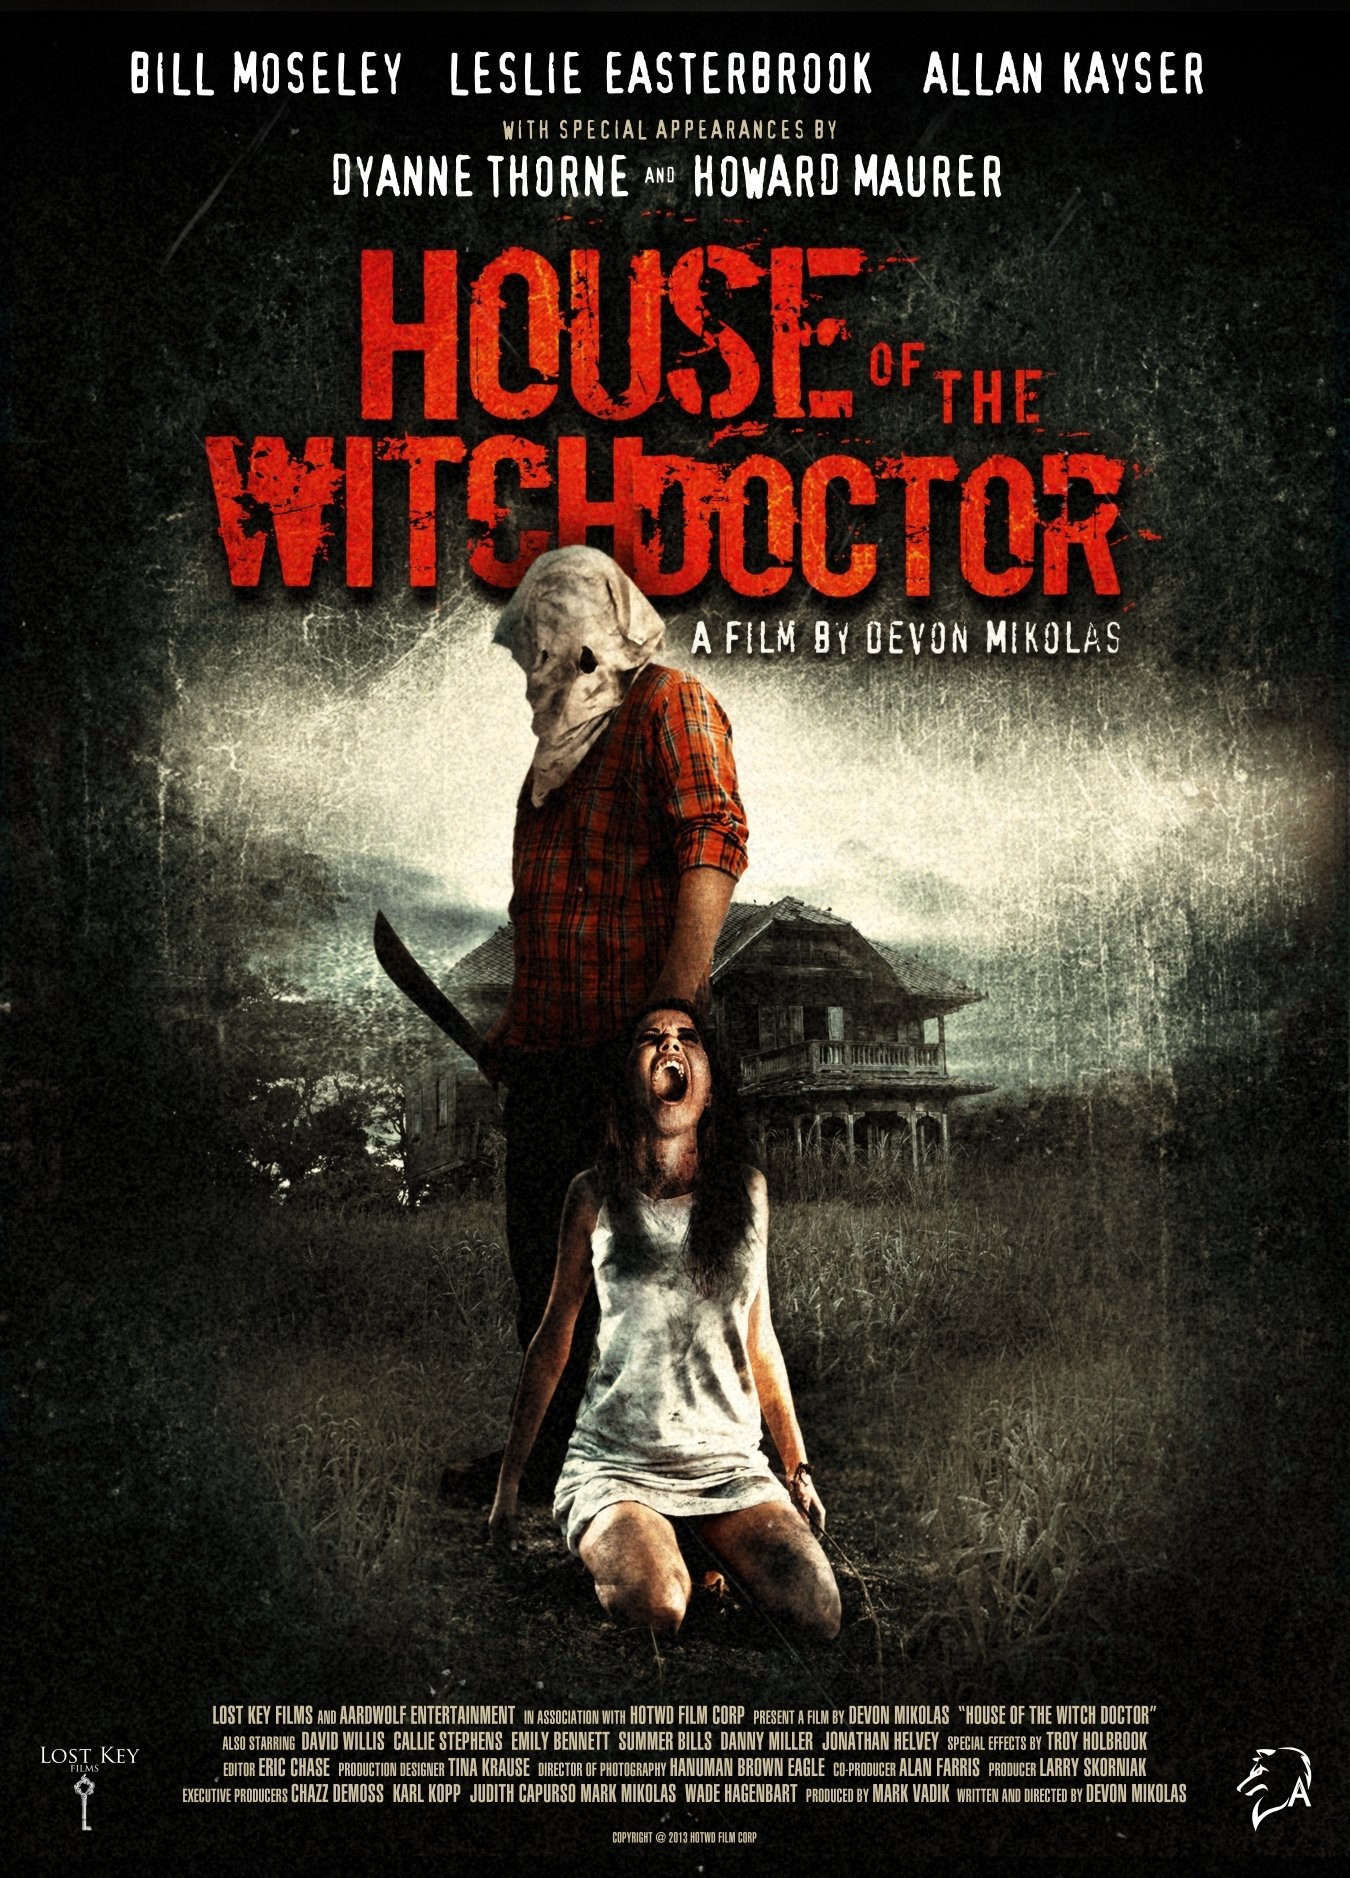 affiche du film House of the Witchdoctor